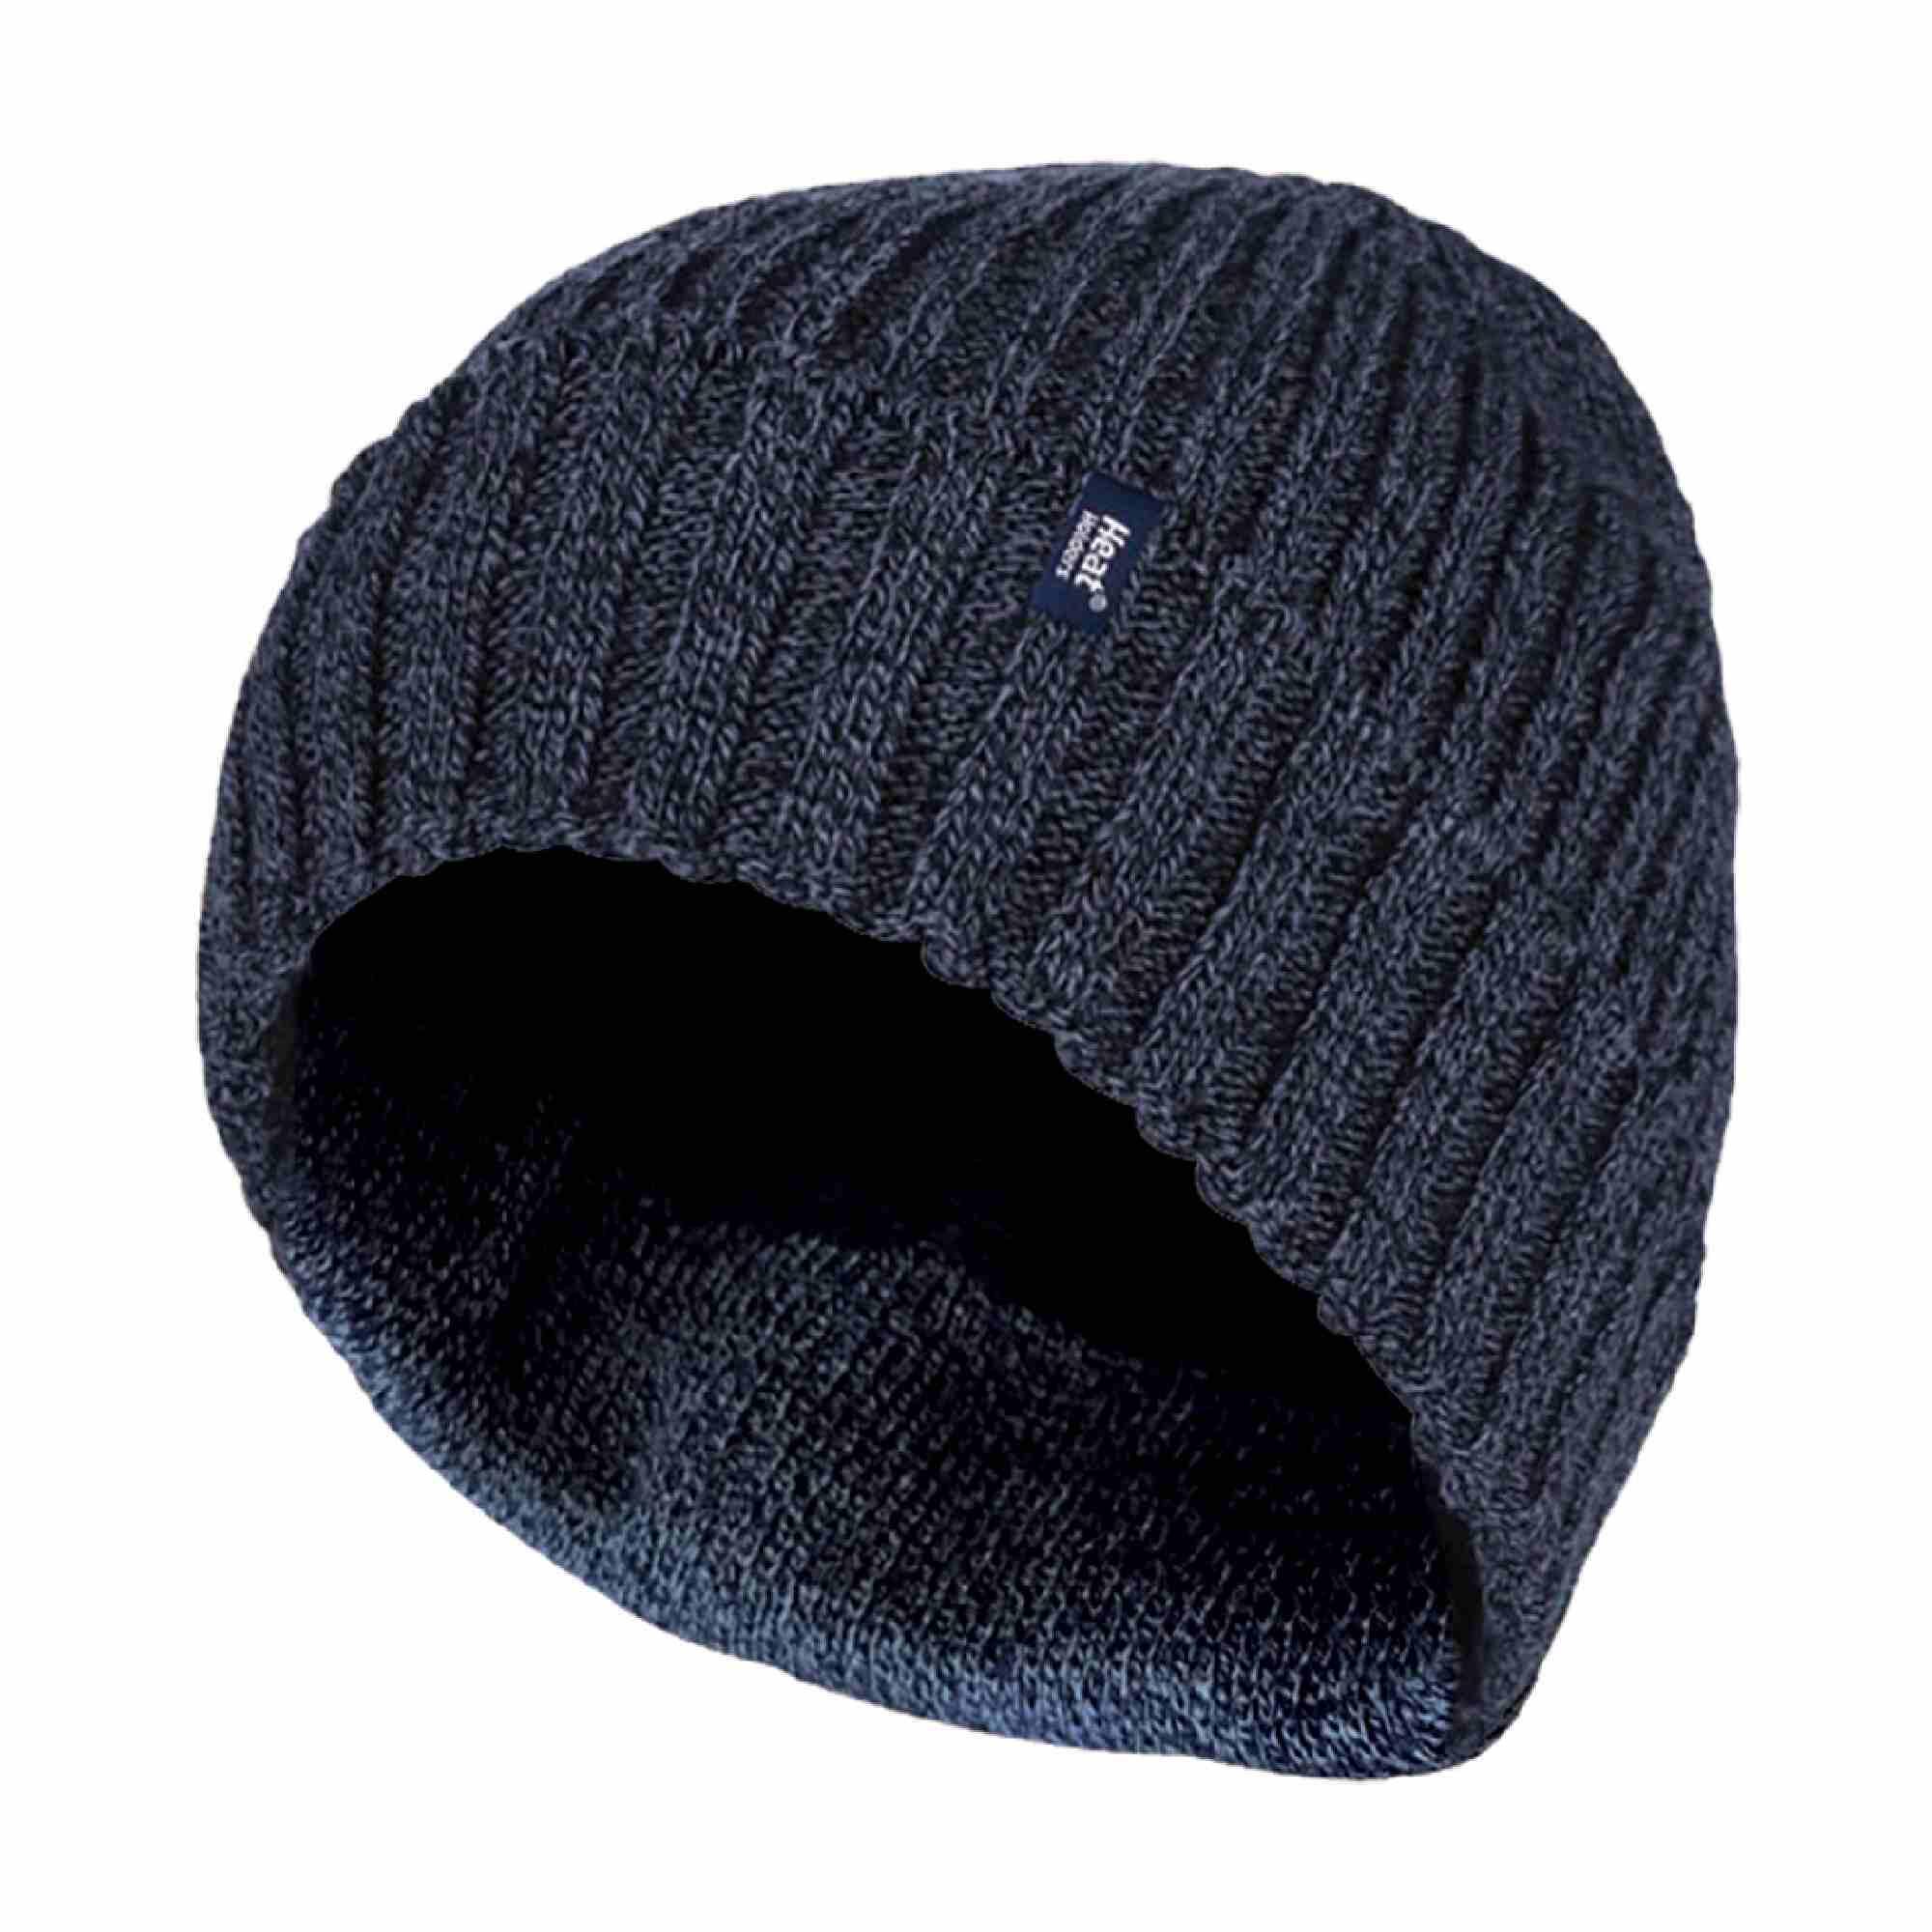 Mens Ribbed Knit Fleece Lined Warm Turn Over Cuff Thermal Beanie Hat 1/6